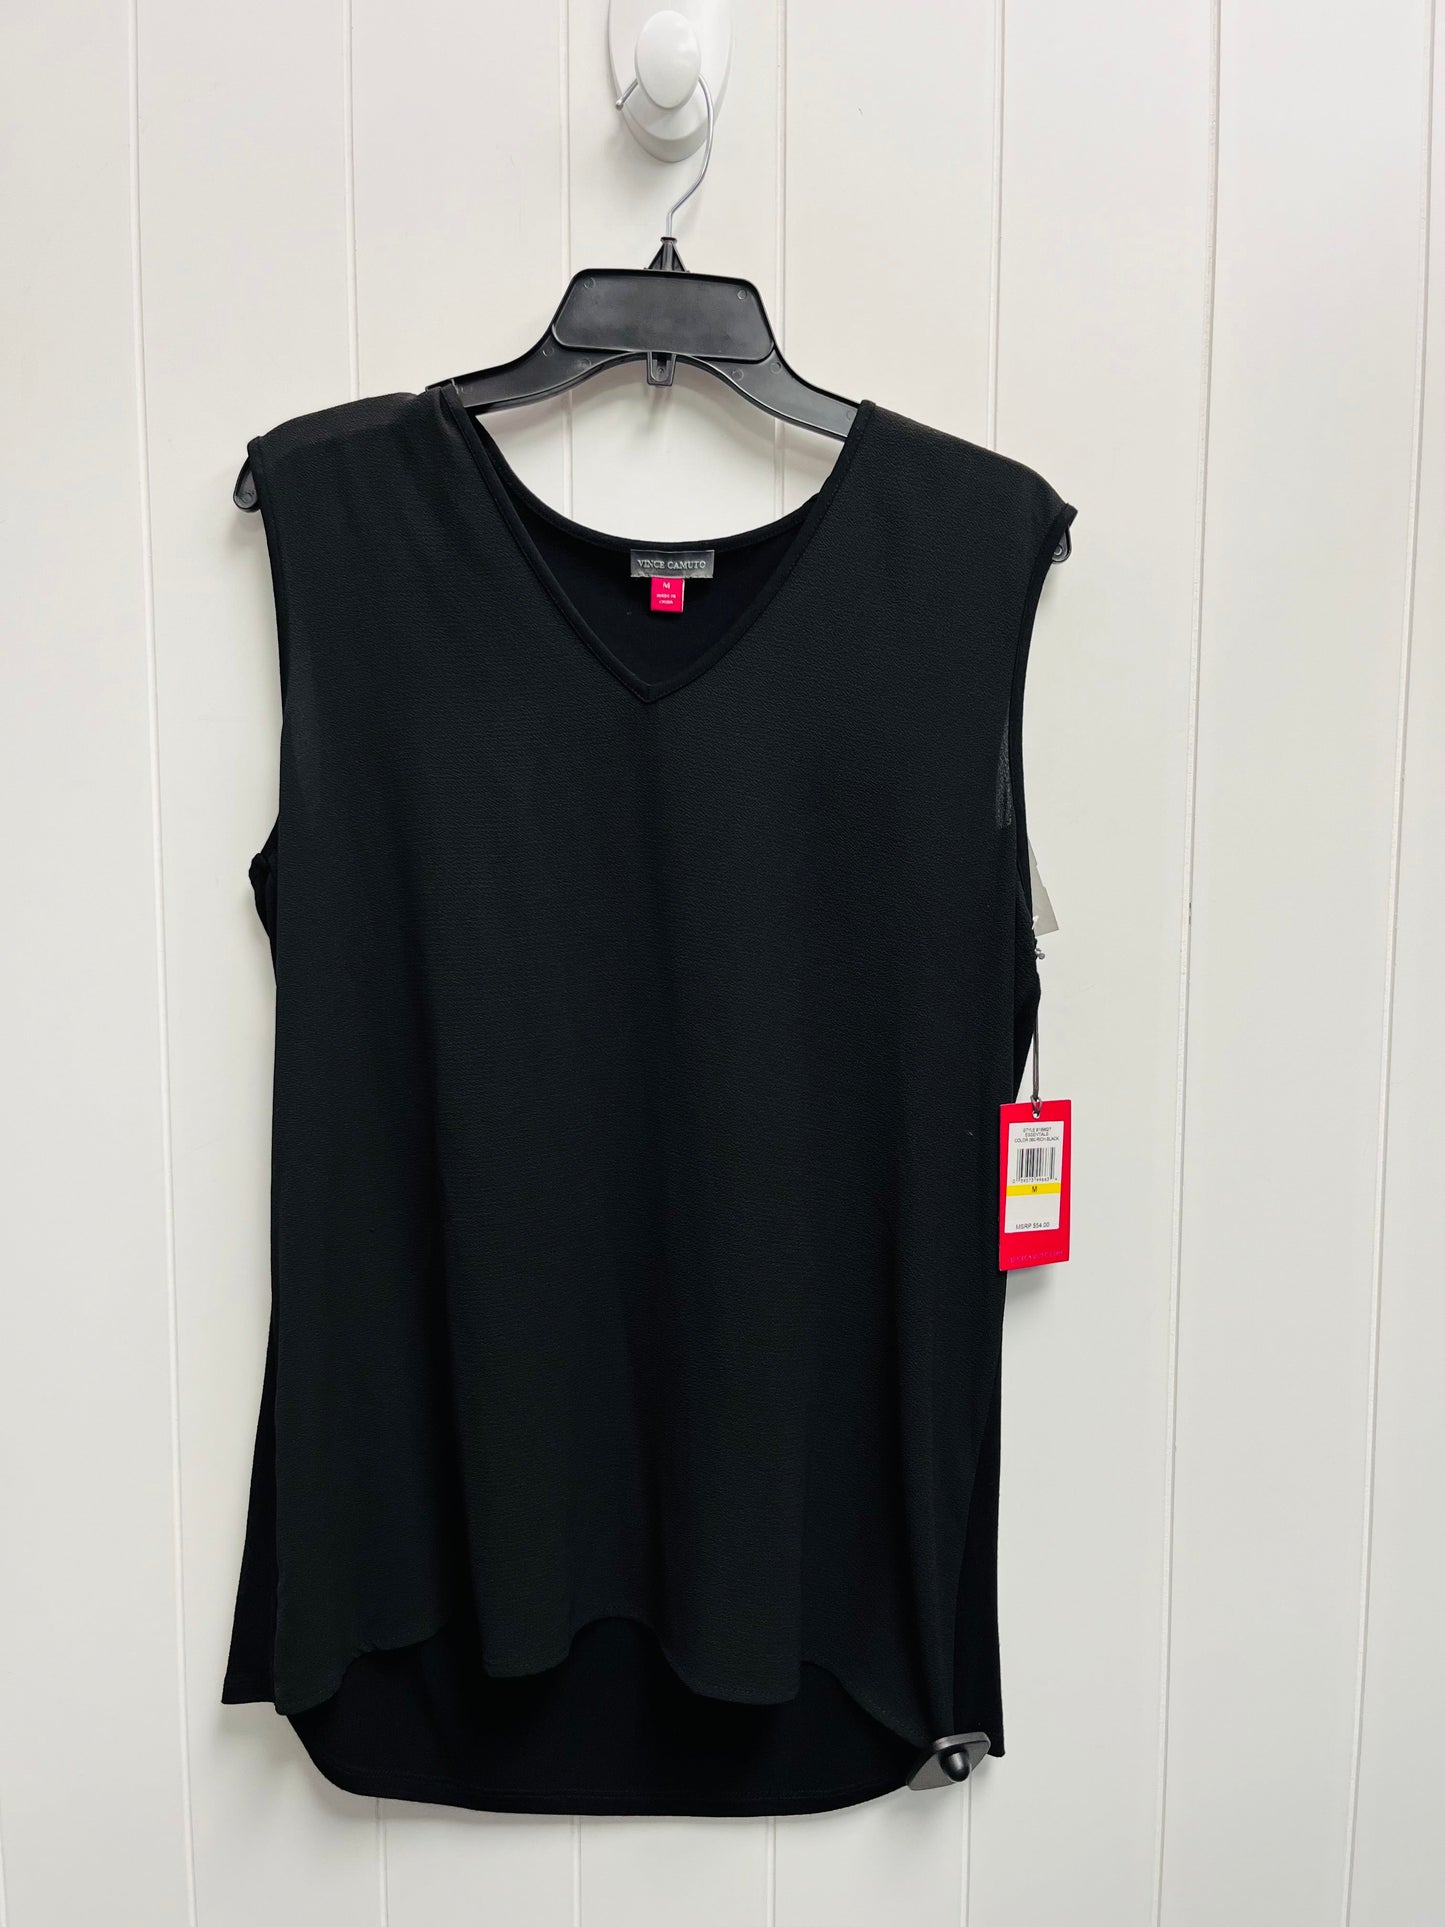 Black Top Short Sleeve Vince Camuto, Size 0